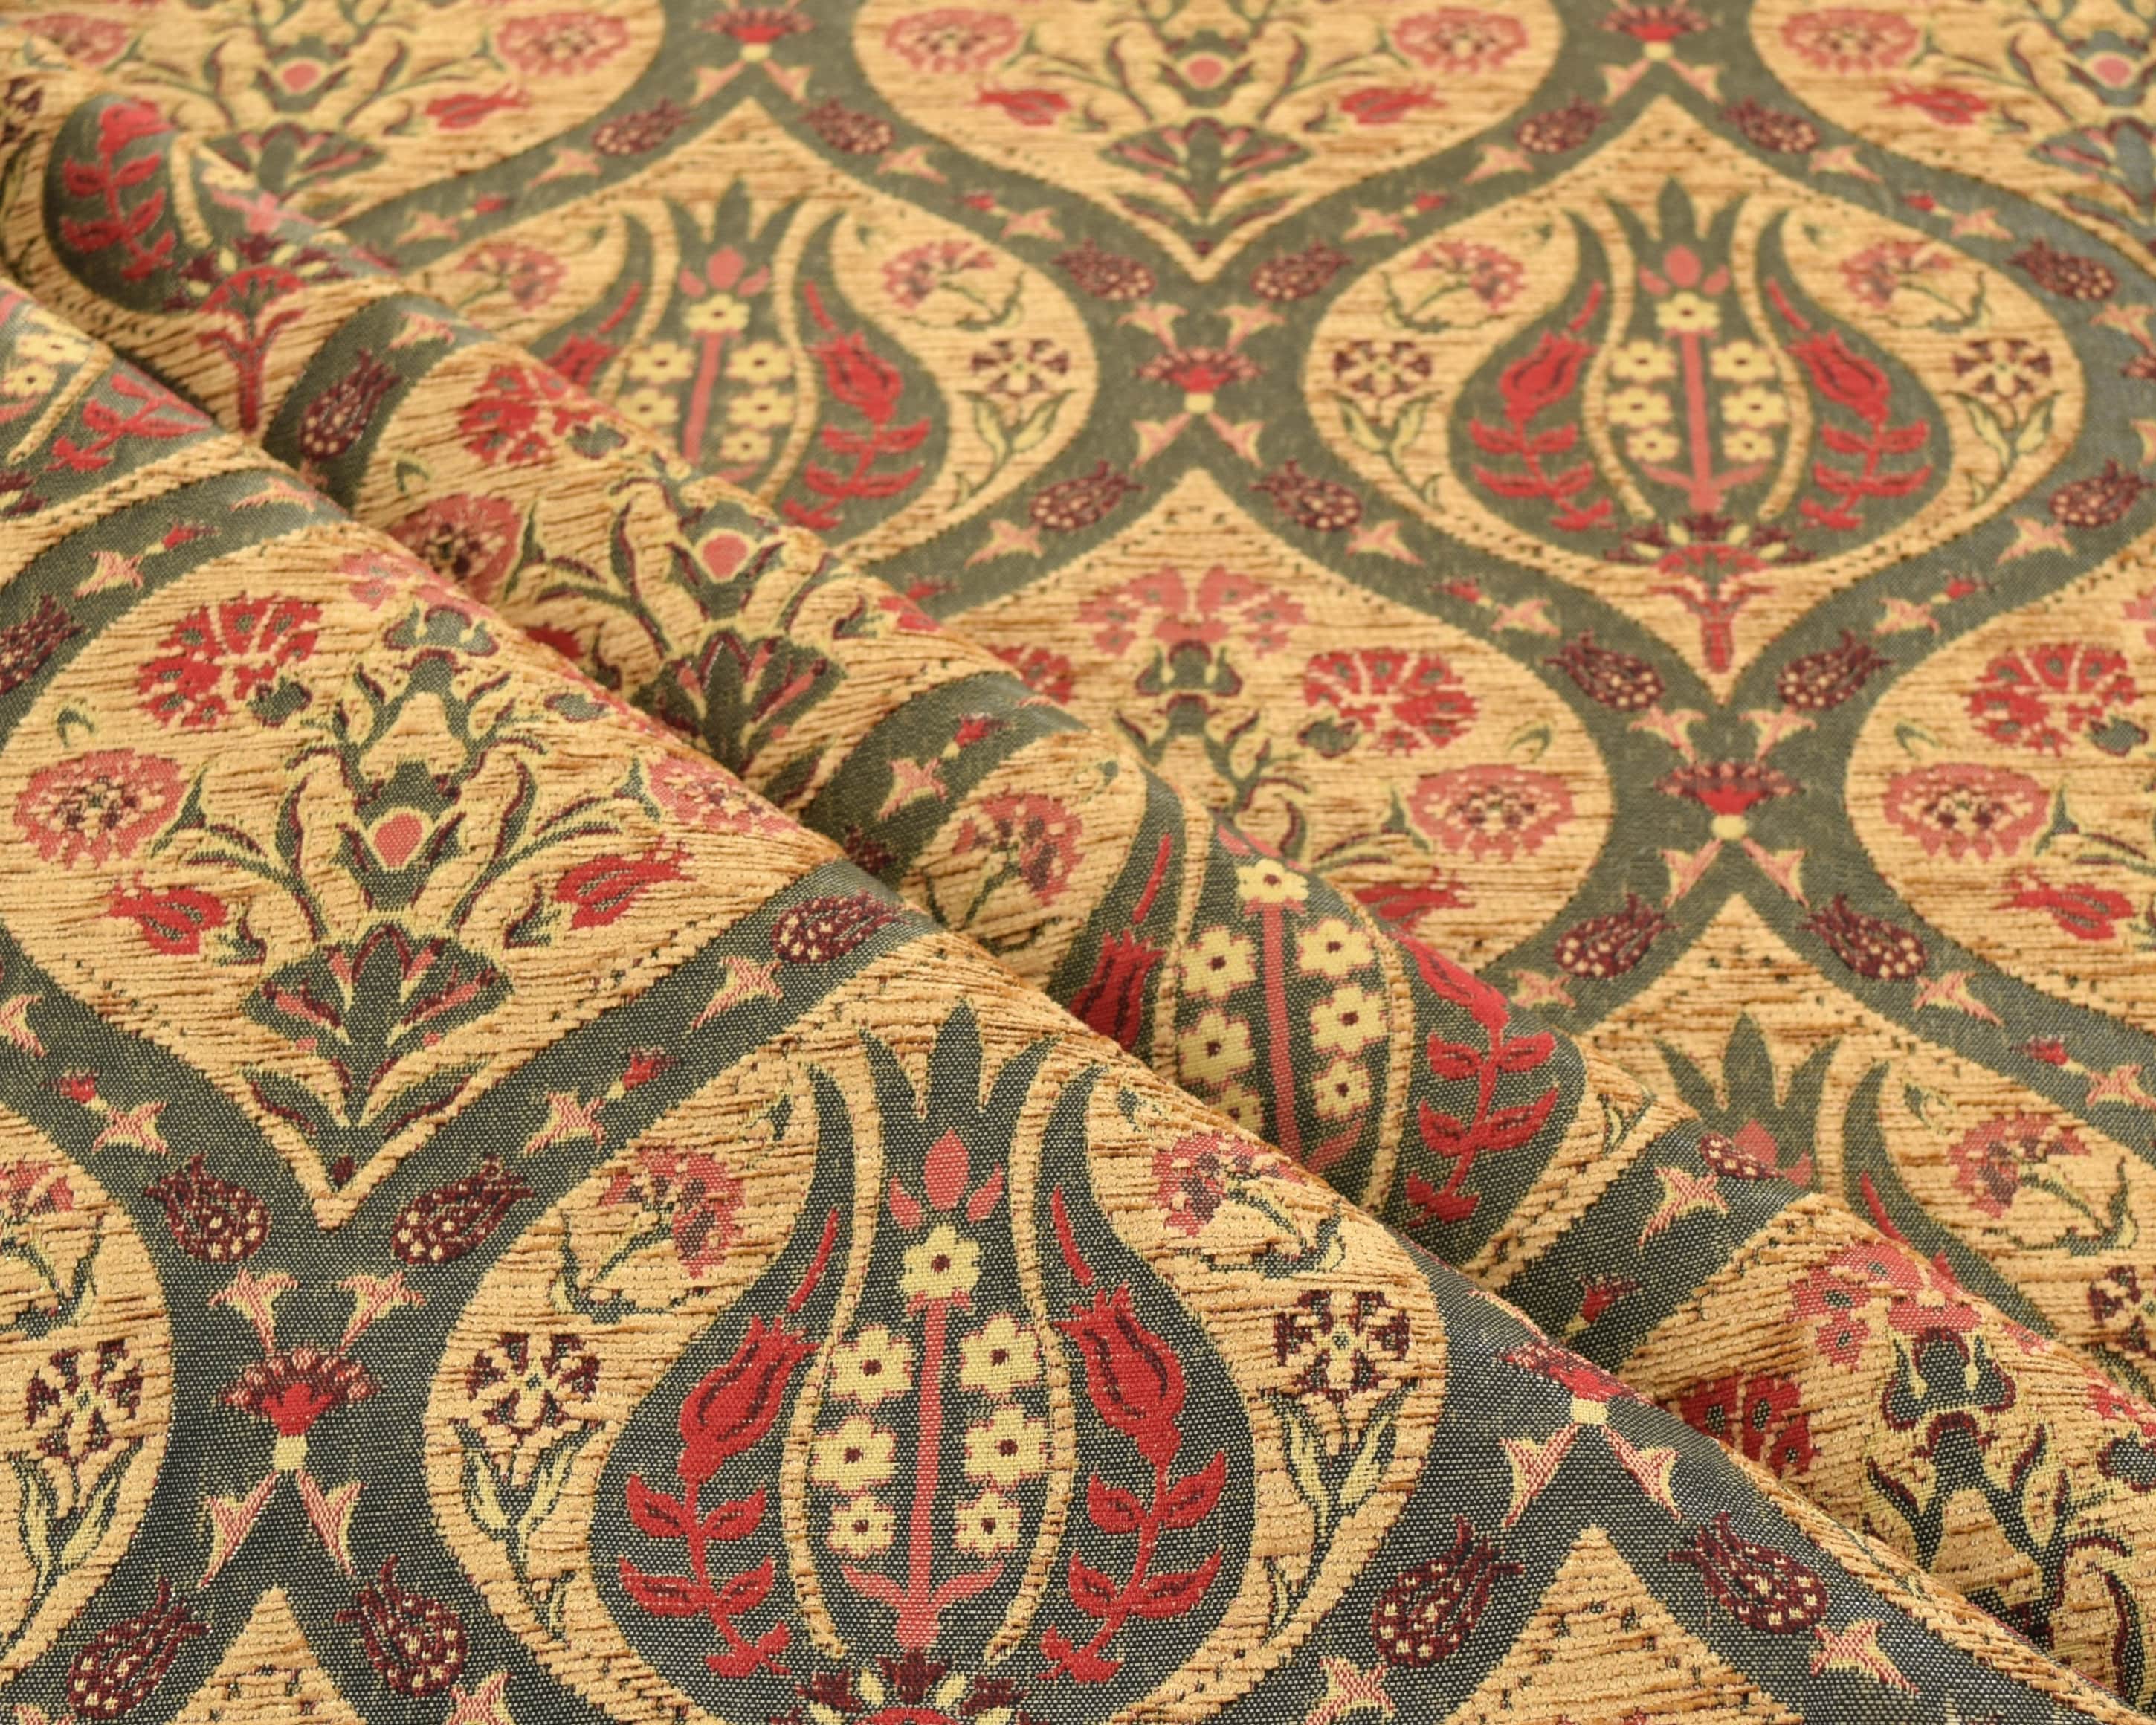 Antique Gold Upholstery Chenille Fabric ,decorative Chenille